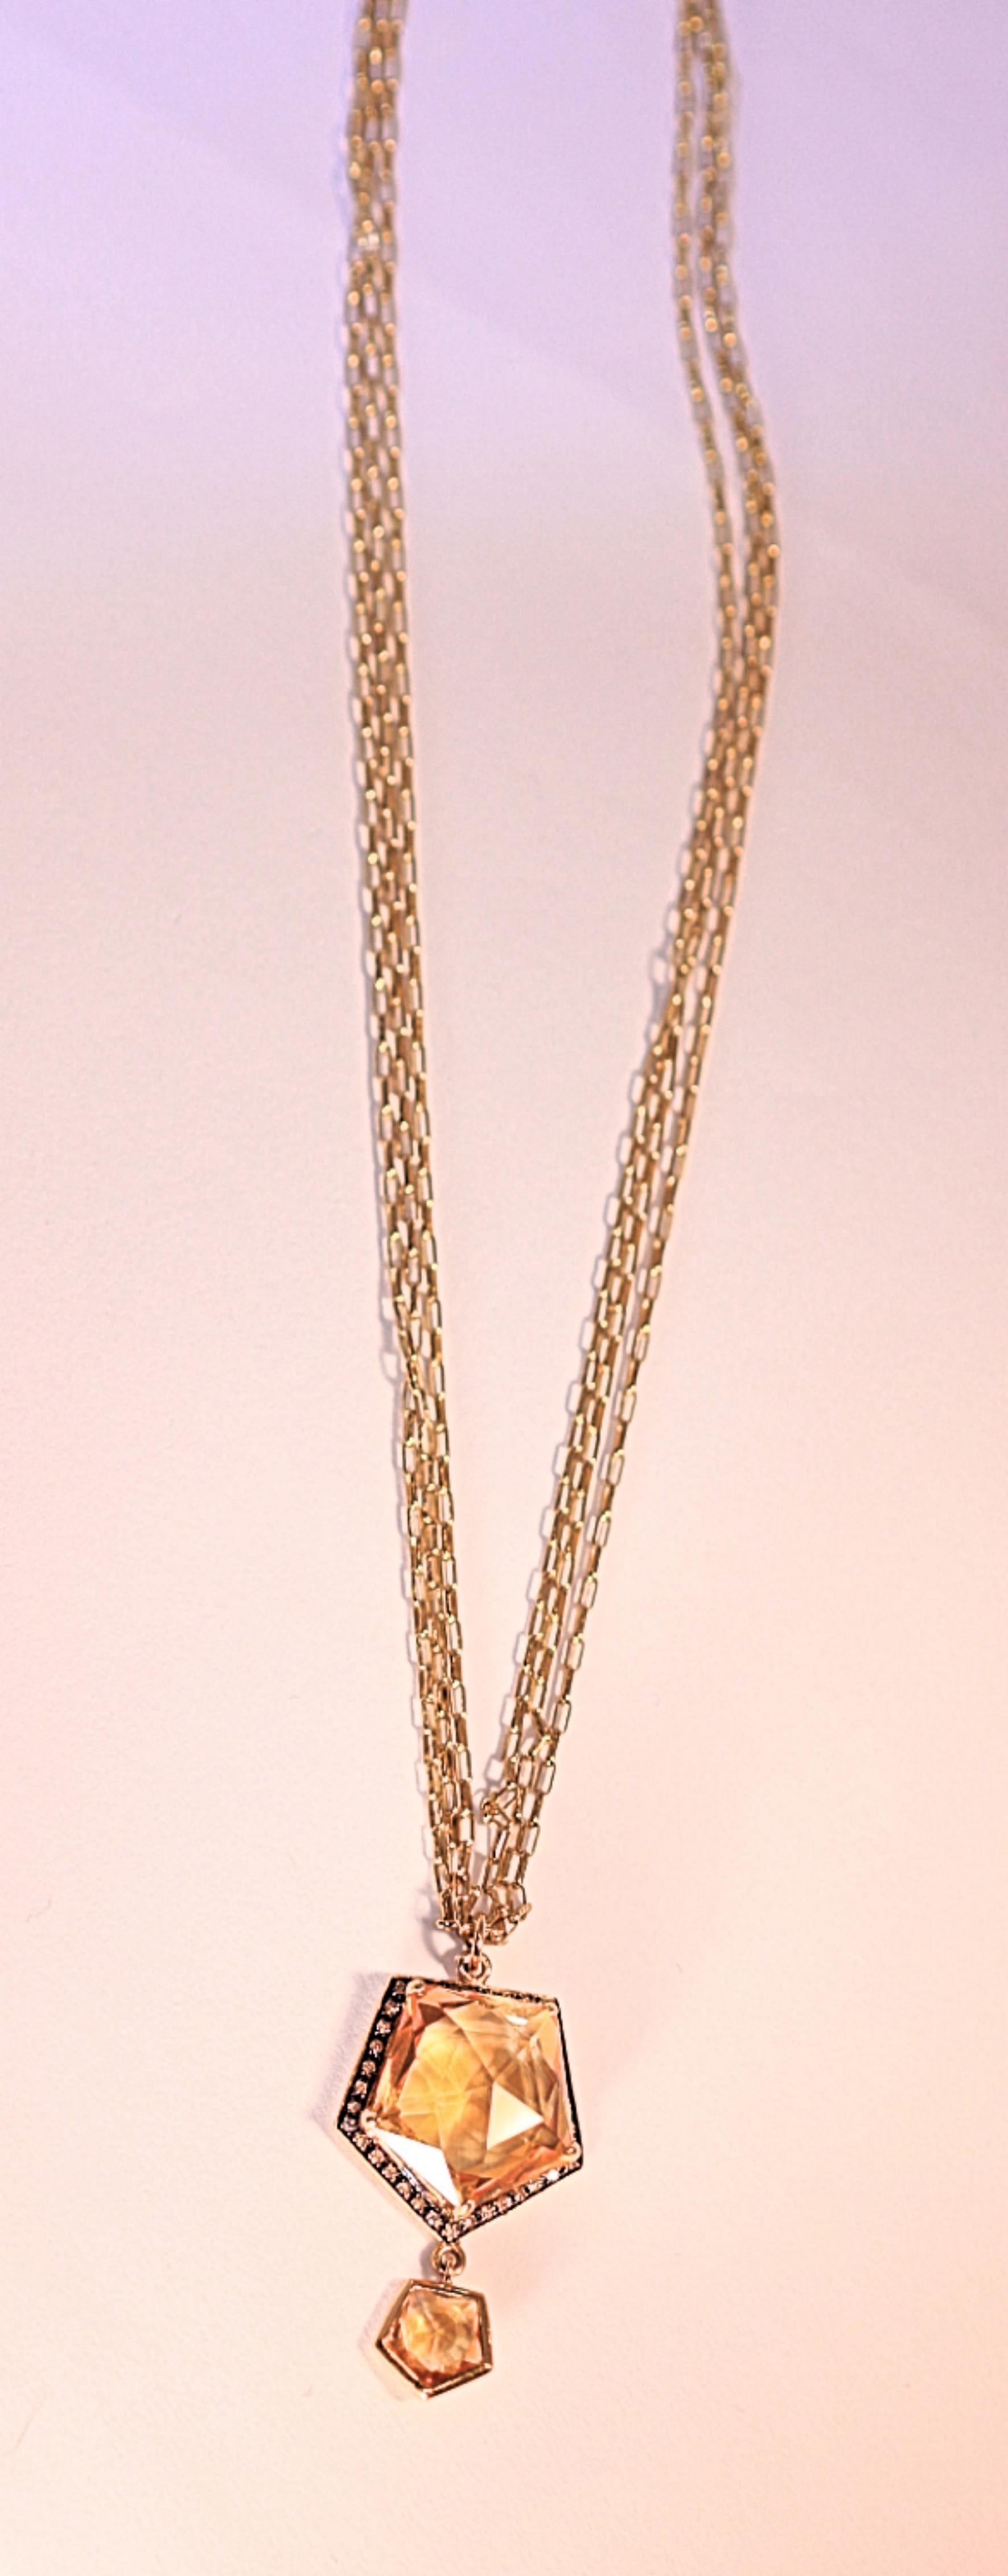 Citrine Brown Diamond 18 Karat Yellow Gold Triple Chain Pendant Necklace In New Condition For Sale In Melbourne, FL